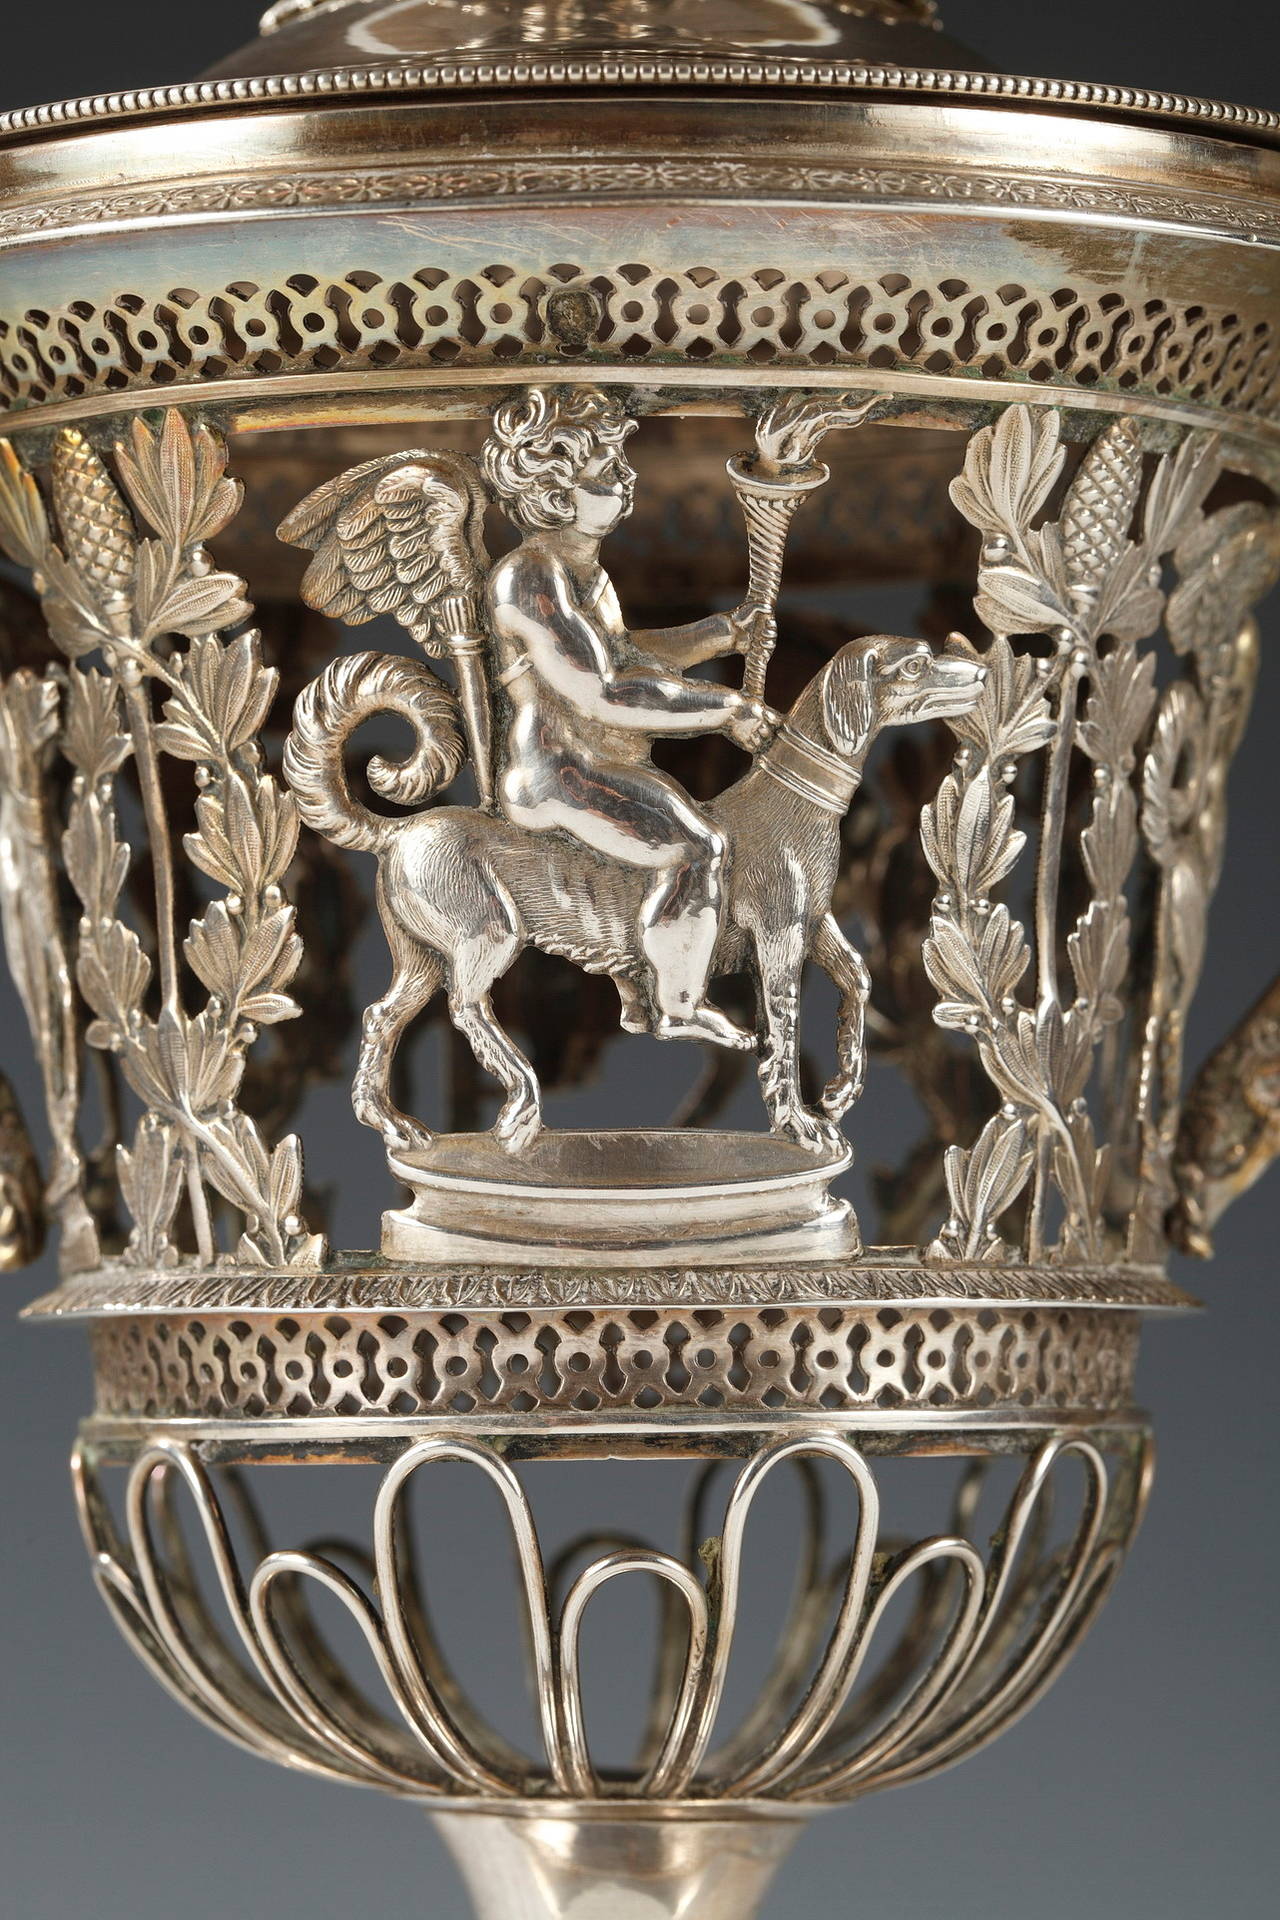 Solid silver sugar bowl and cover figuring a delicate decor of cherubs riding dogs separated by foliage rolled up around a sceptre top by a pine cone.
Model by Dennis Garreau (Hallmarked DG) 
Vieillard Hallmark